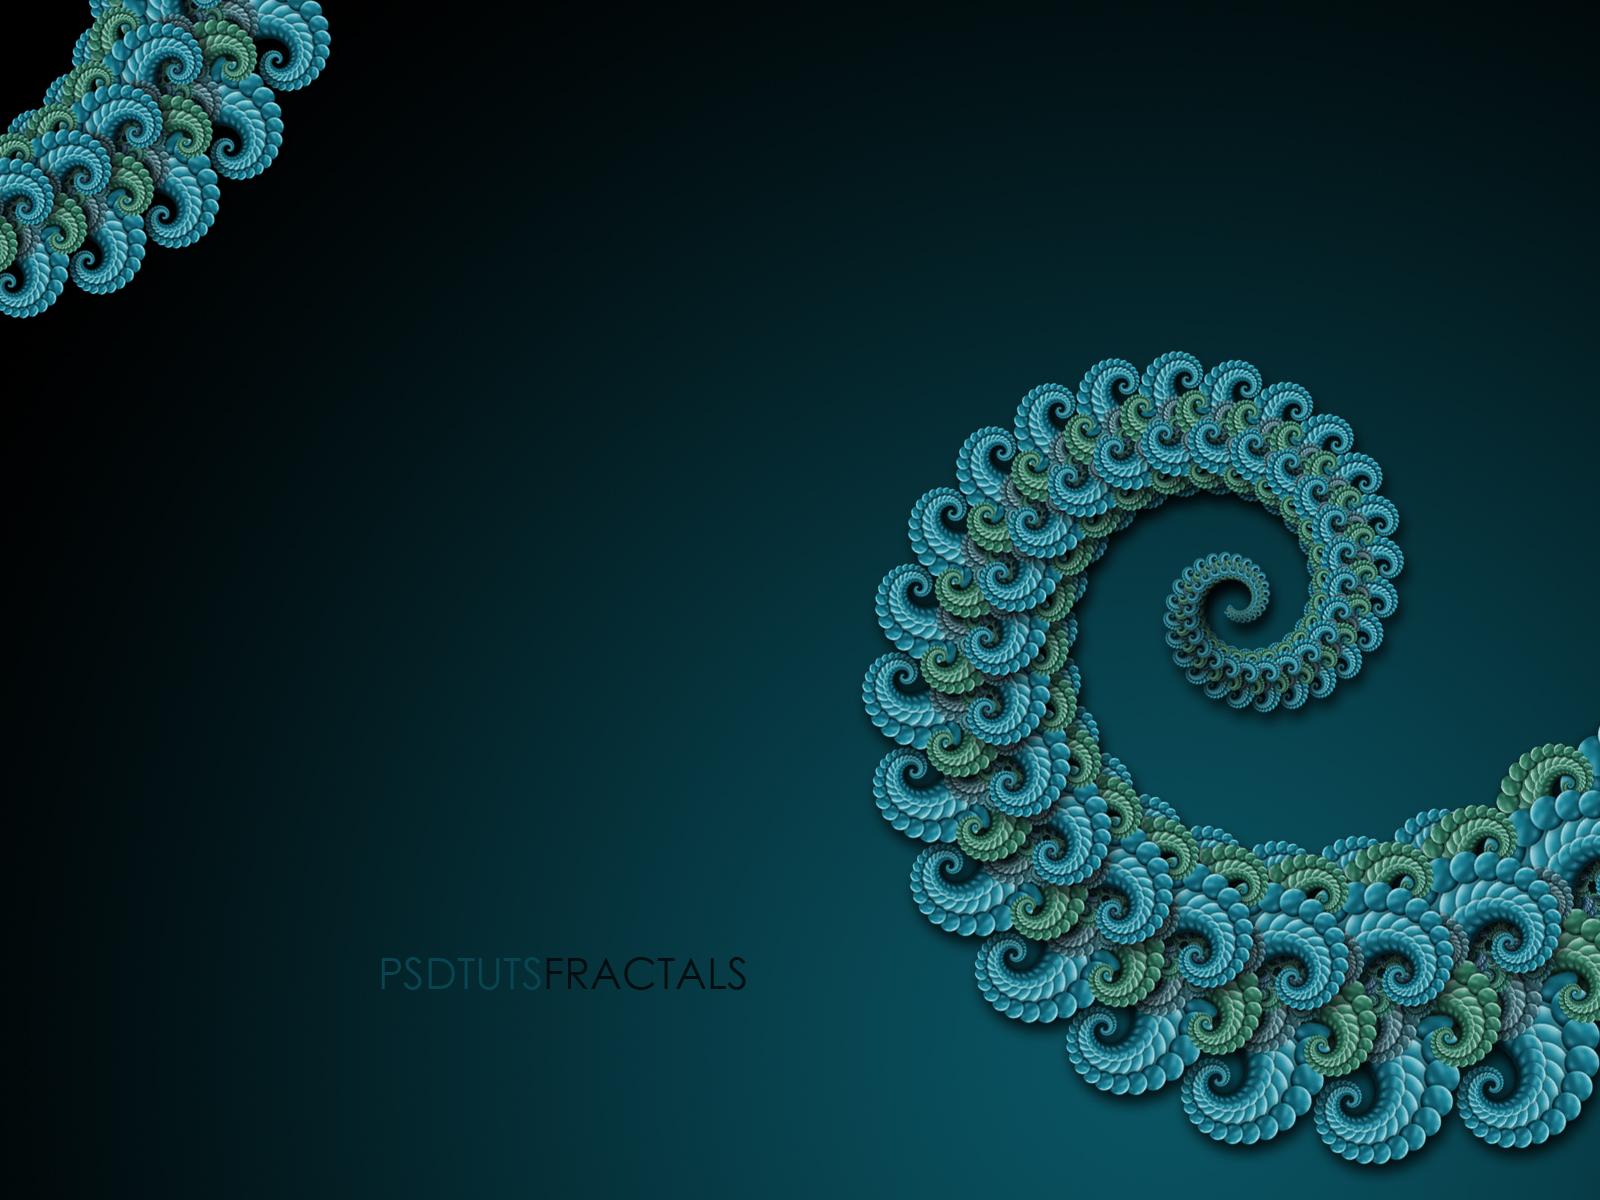 How to Simulate Fractals in Photohop